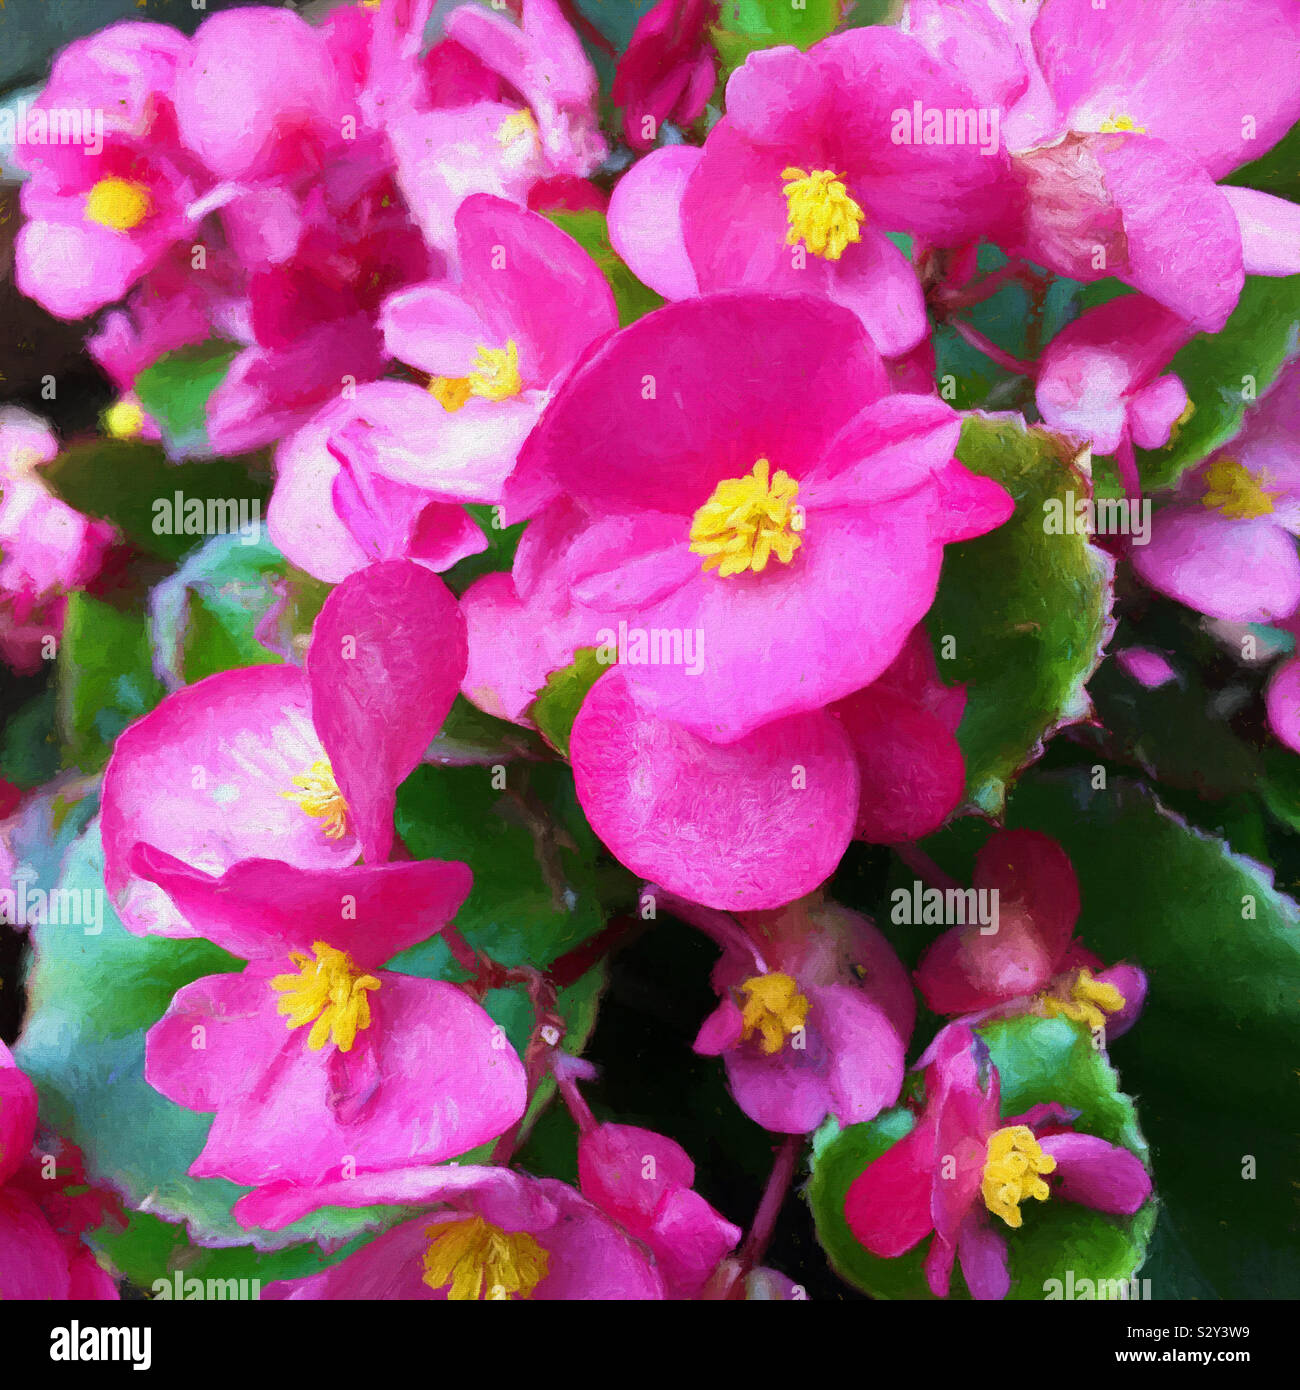 Colorful pink begonia flowers with bright yellow centers in full bloom. The genus begonia contains more than 1800 different plant species. Stock Photo